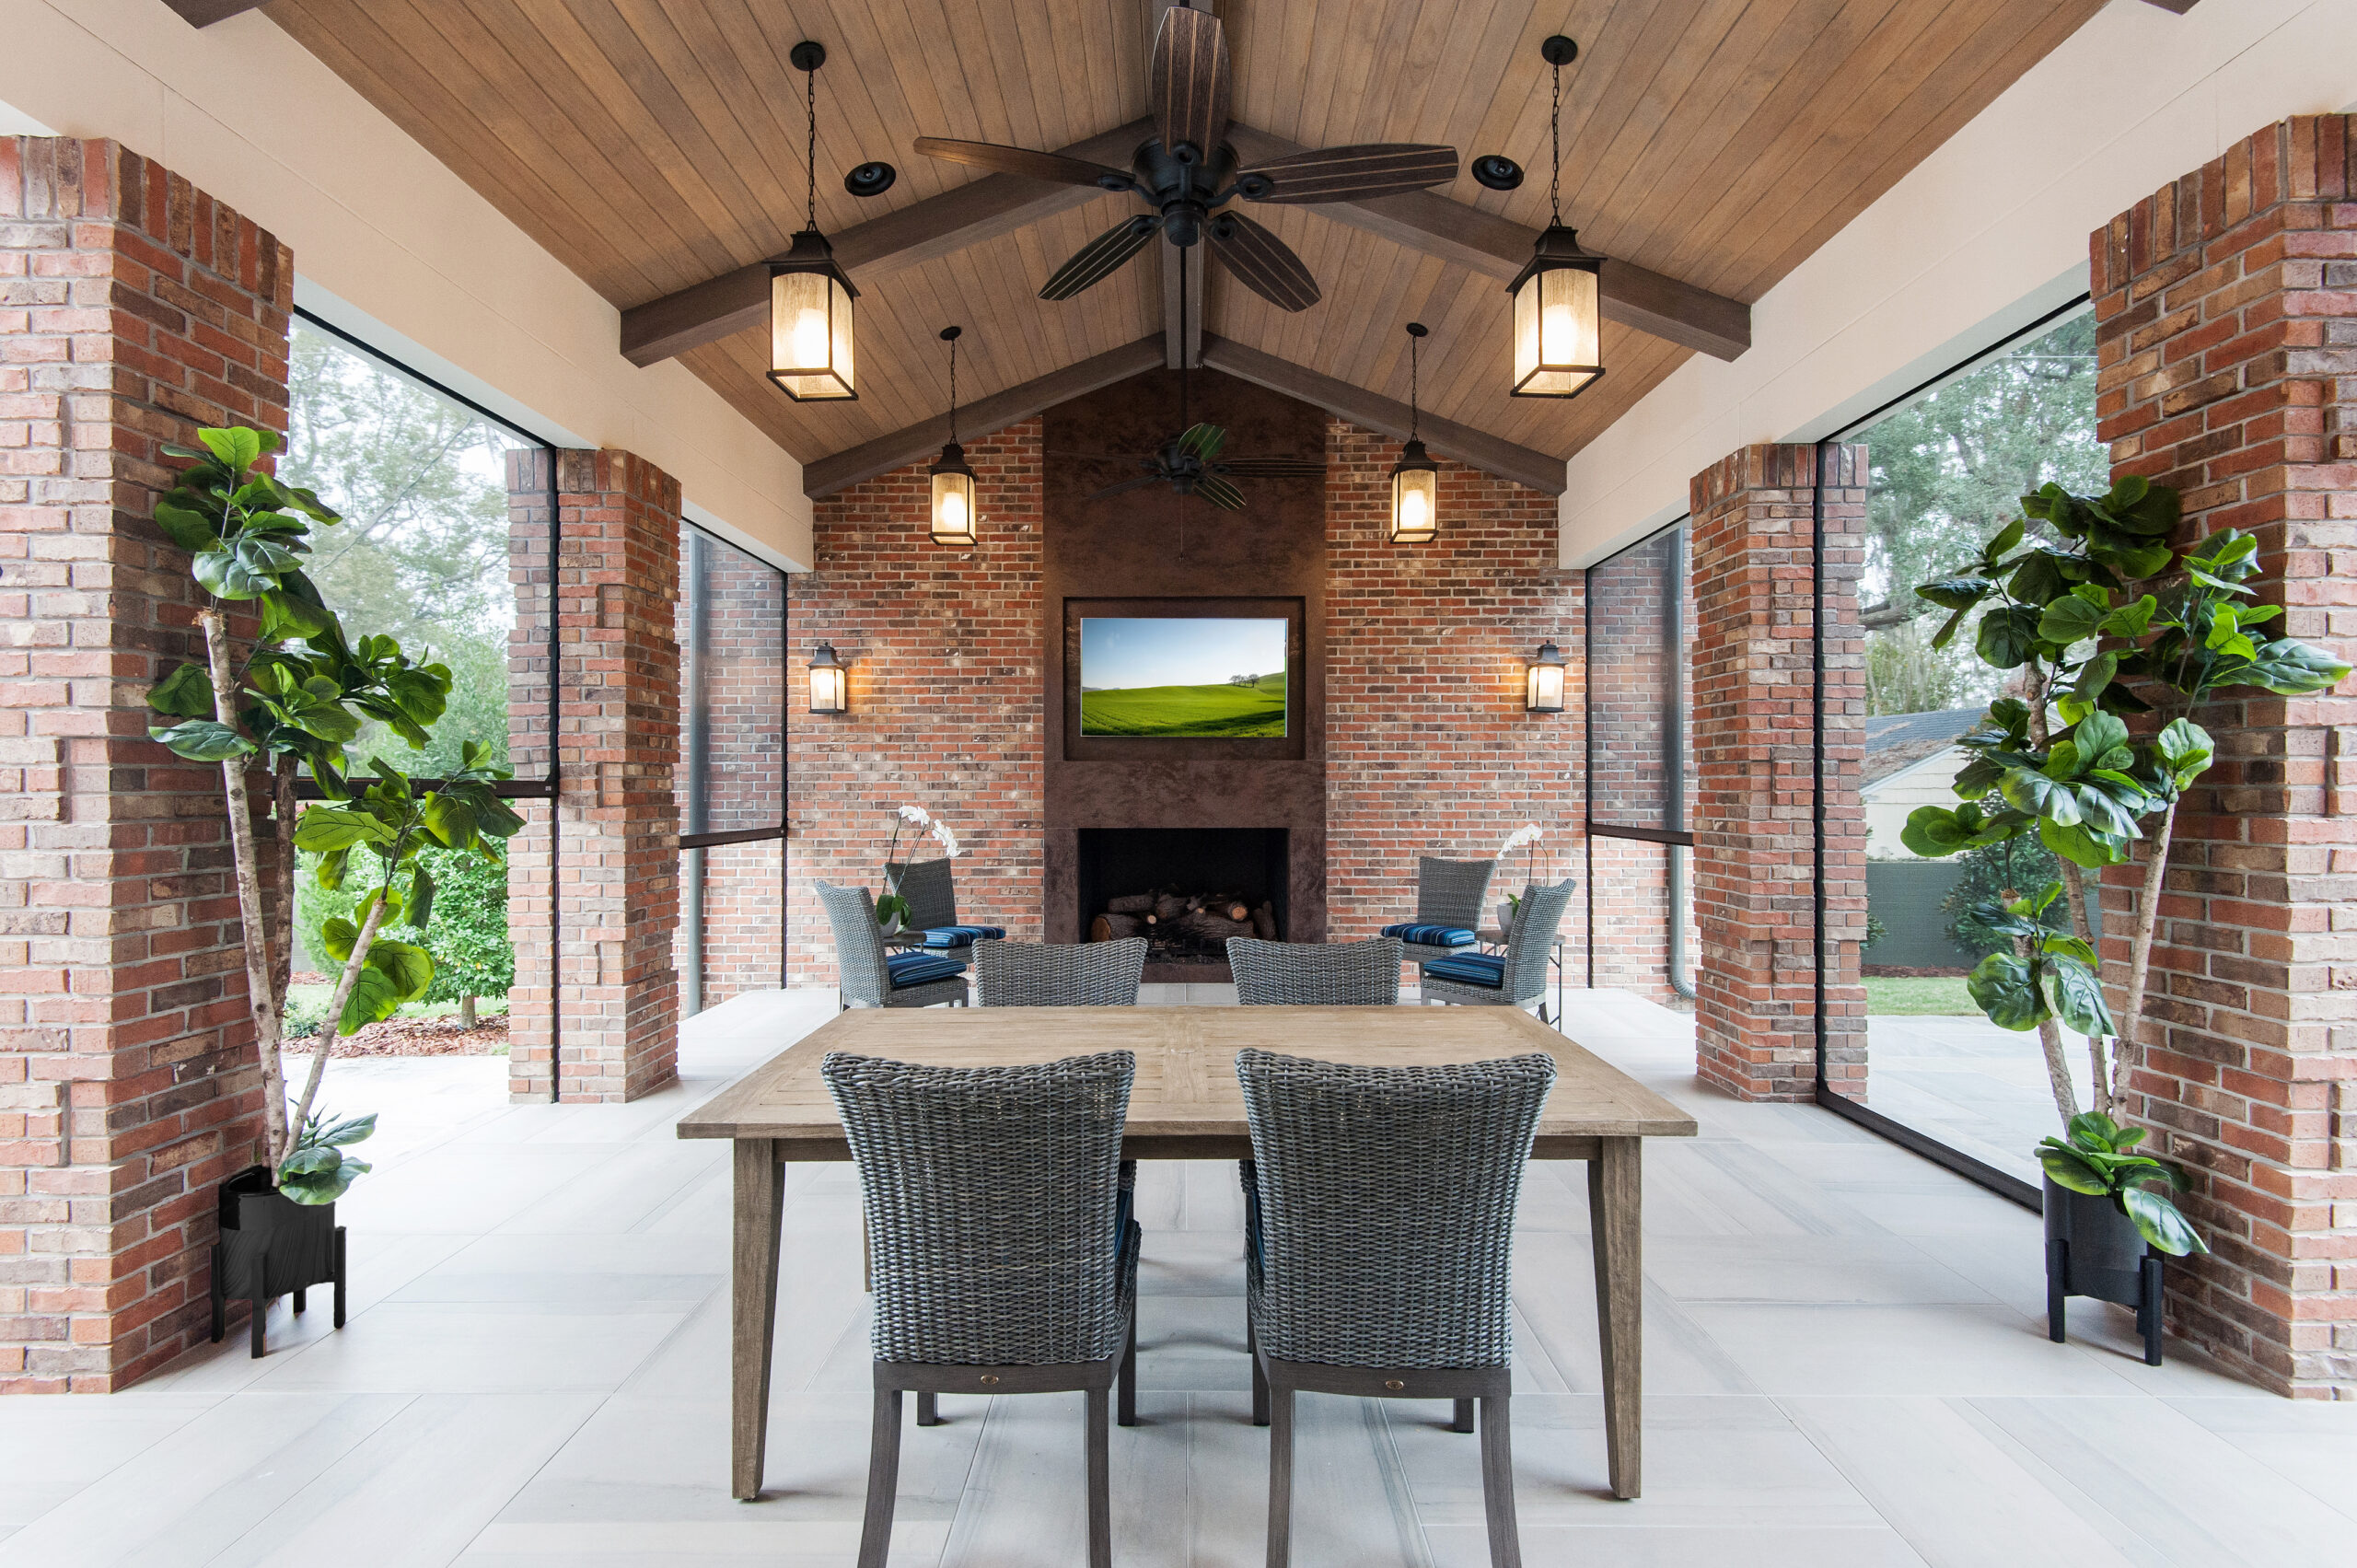 Phantom motorized retractable screens installed in an outdoor living space